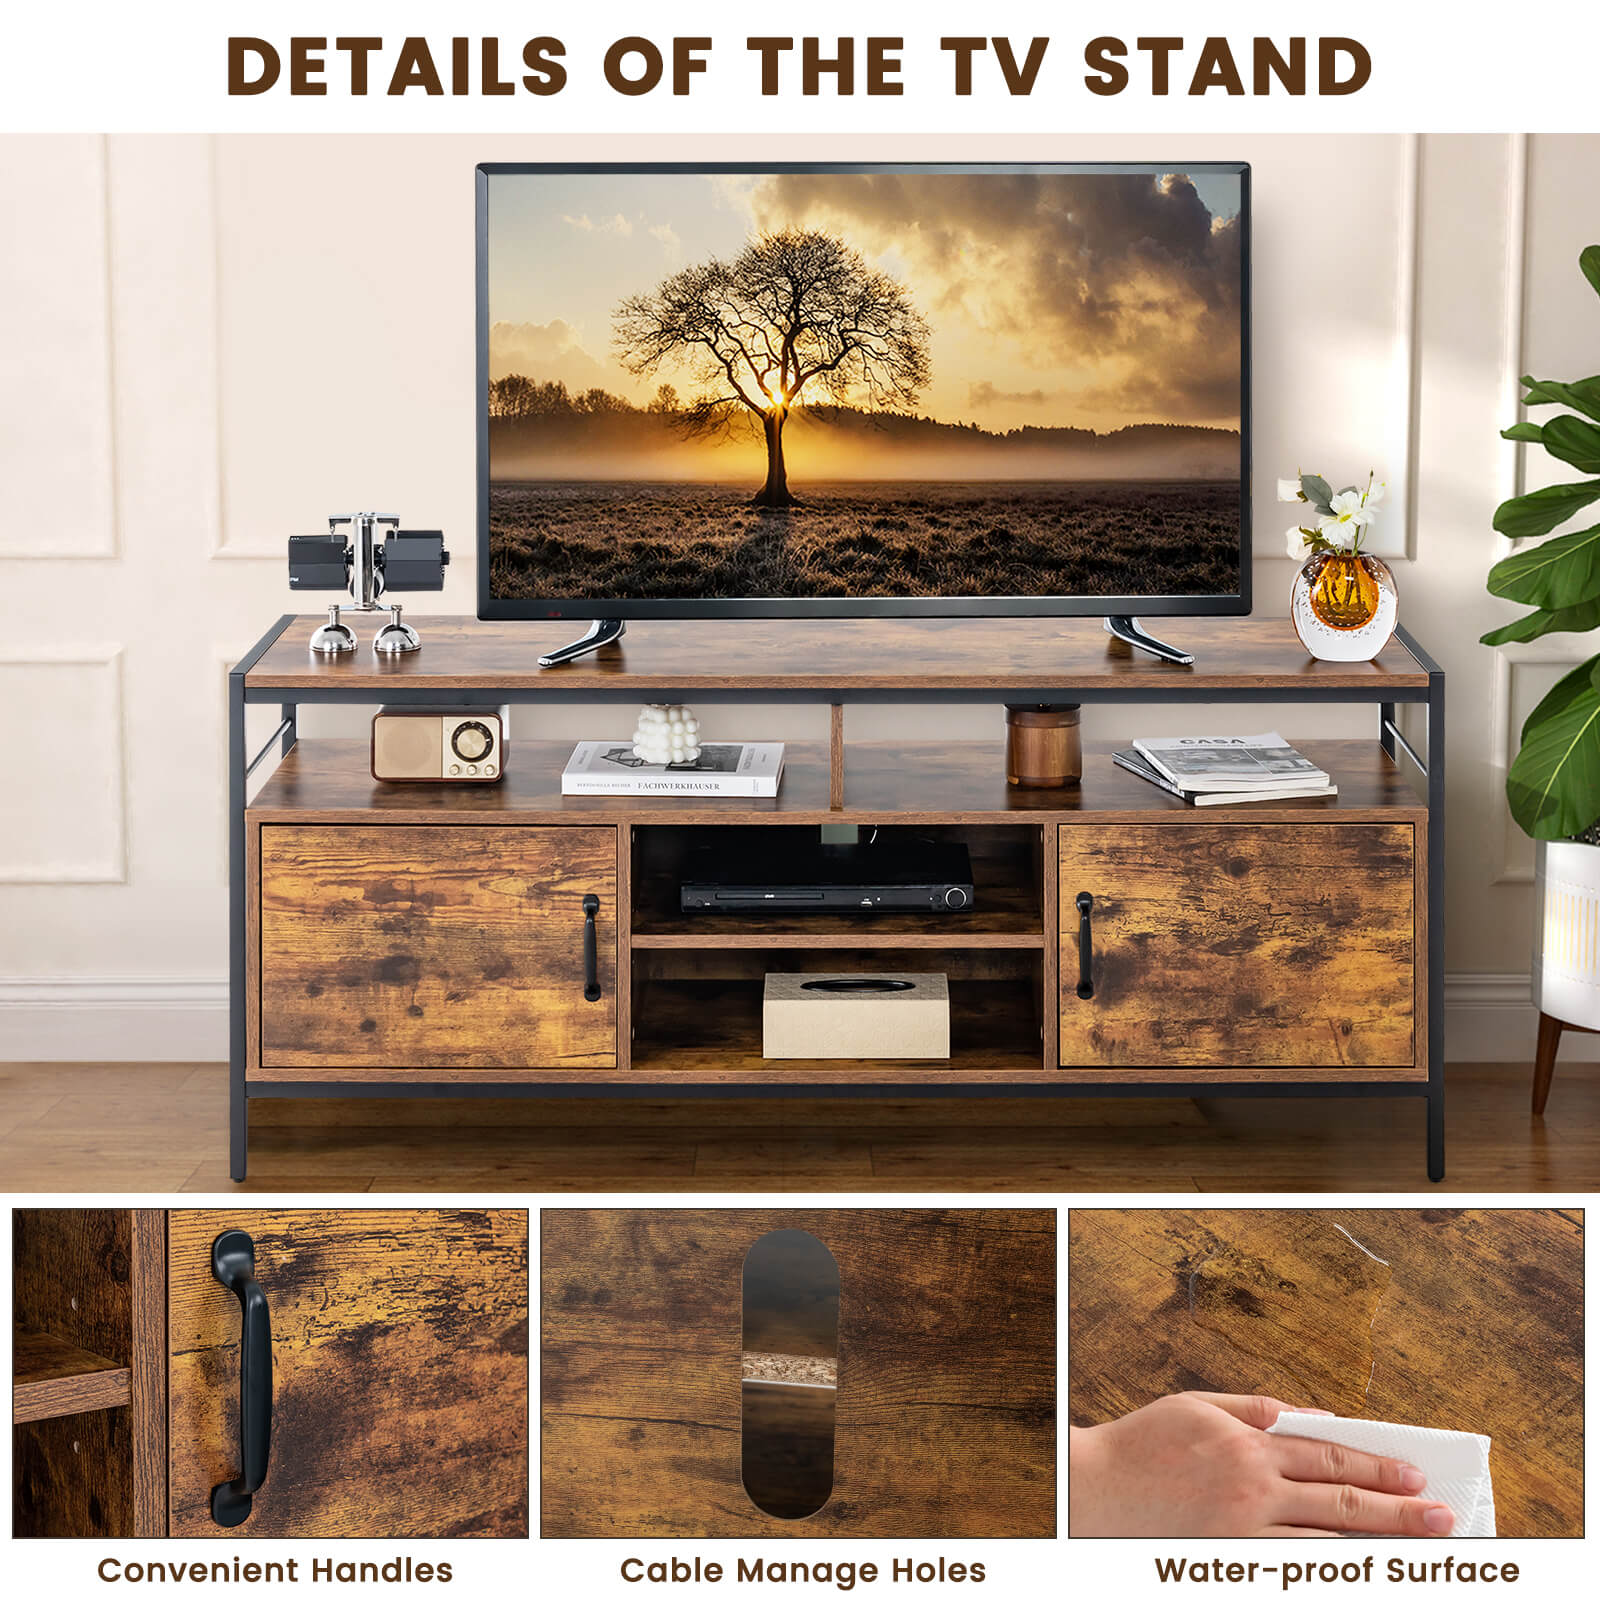 Industrial_TV_Stand_with_Adjustable_Storage_Shelf_for_TVs_up_to_65_Inch-10.jpg